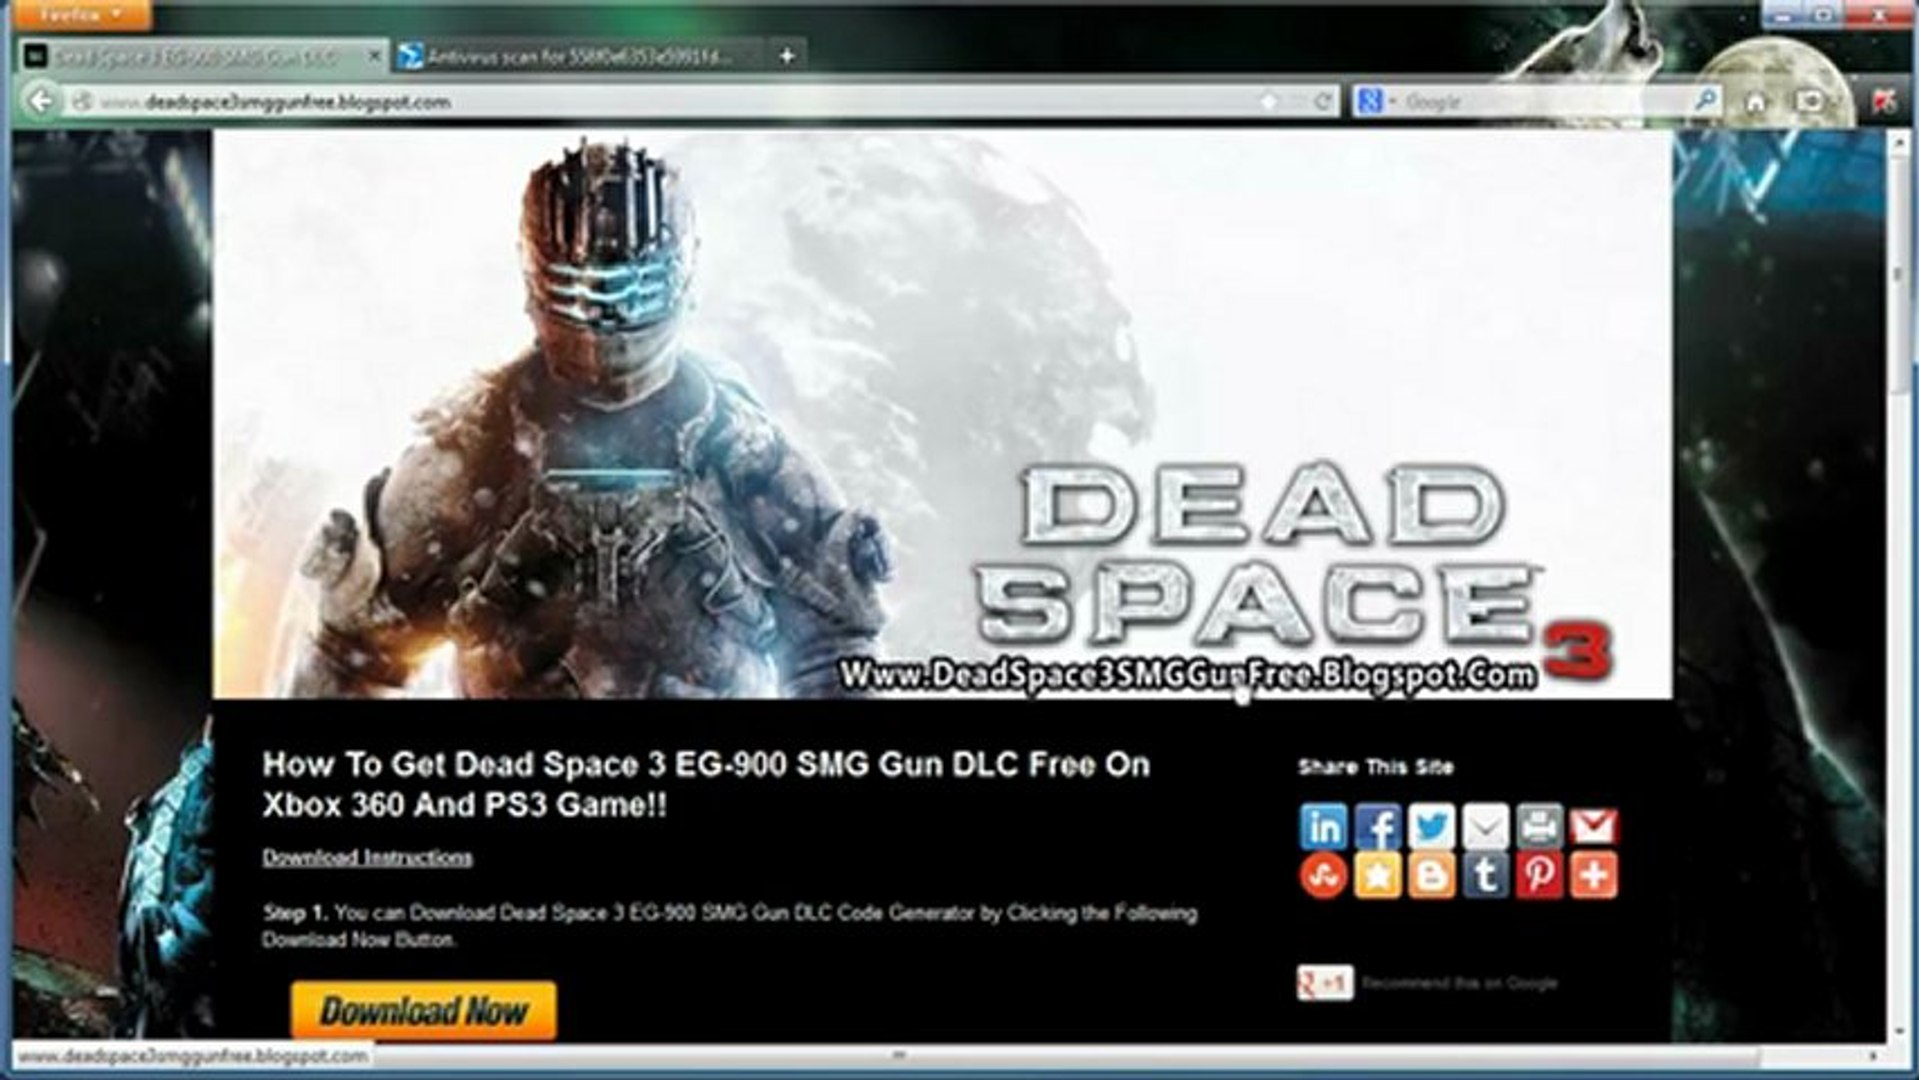 How to Get Dead Space 3 EG-900 SMG Gun DLC Free!! - video Dailymotion